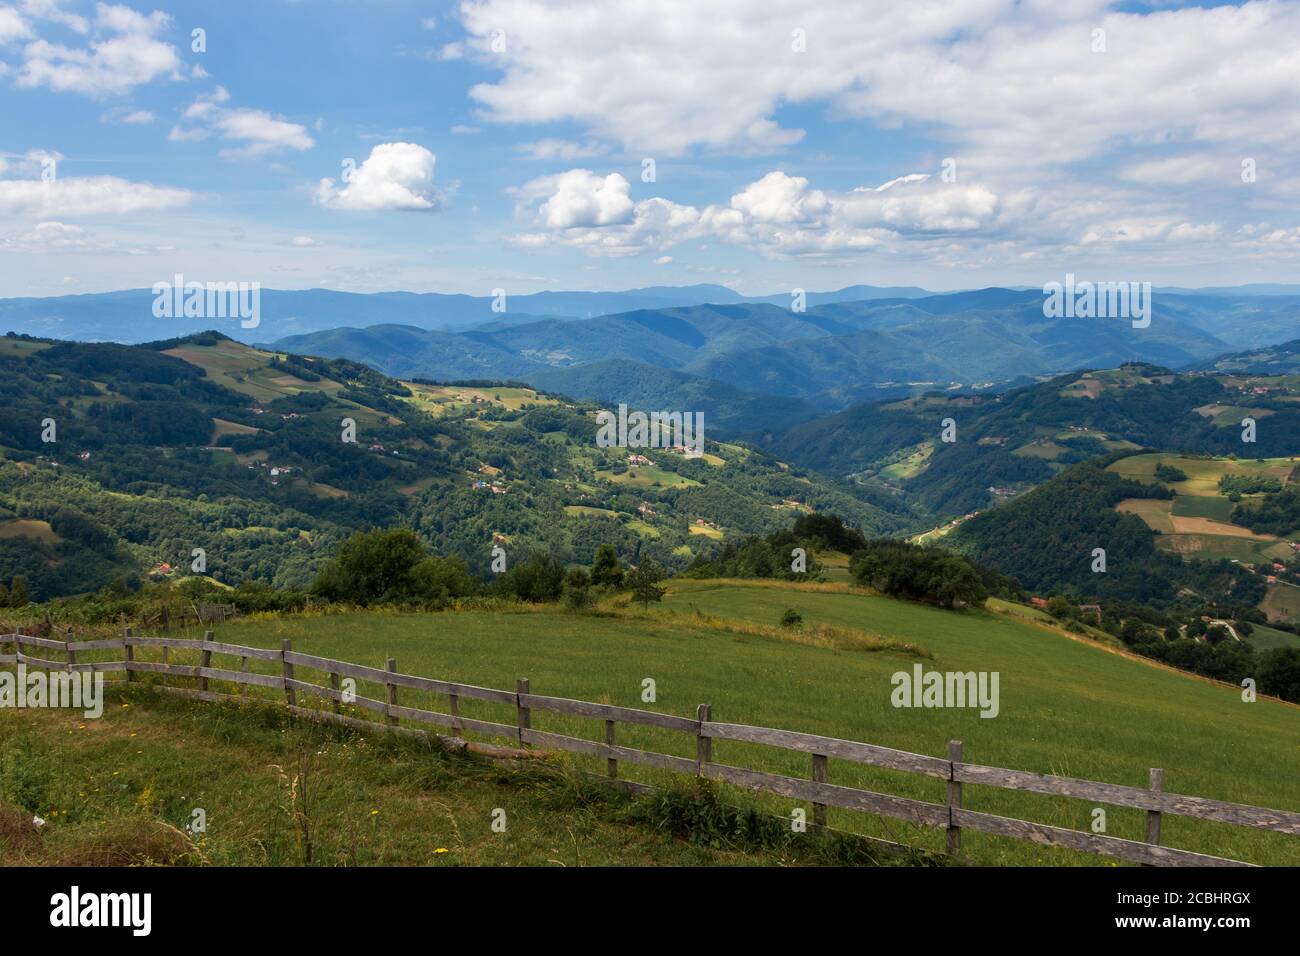 The Gate of Podrinje Valley on the beginning of the Tara Mountain in Serbia Stock Photo